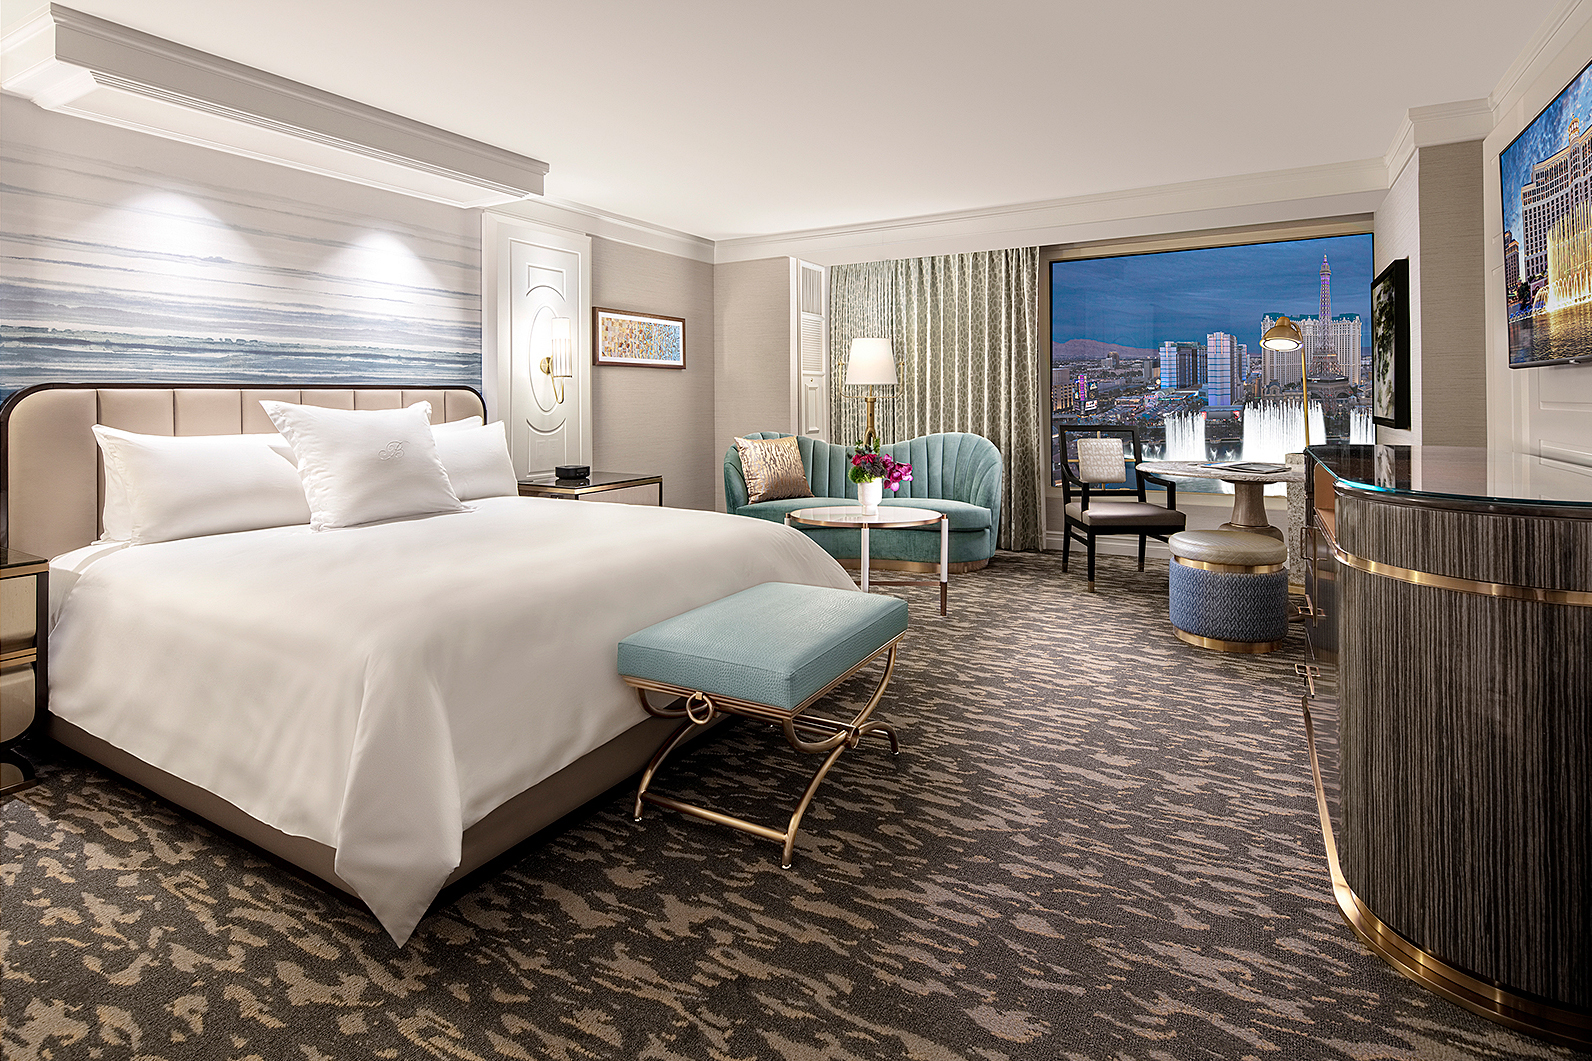 We Found The Best Hotels In Las Vegas That Have Actually Good Design